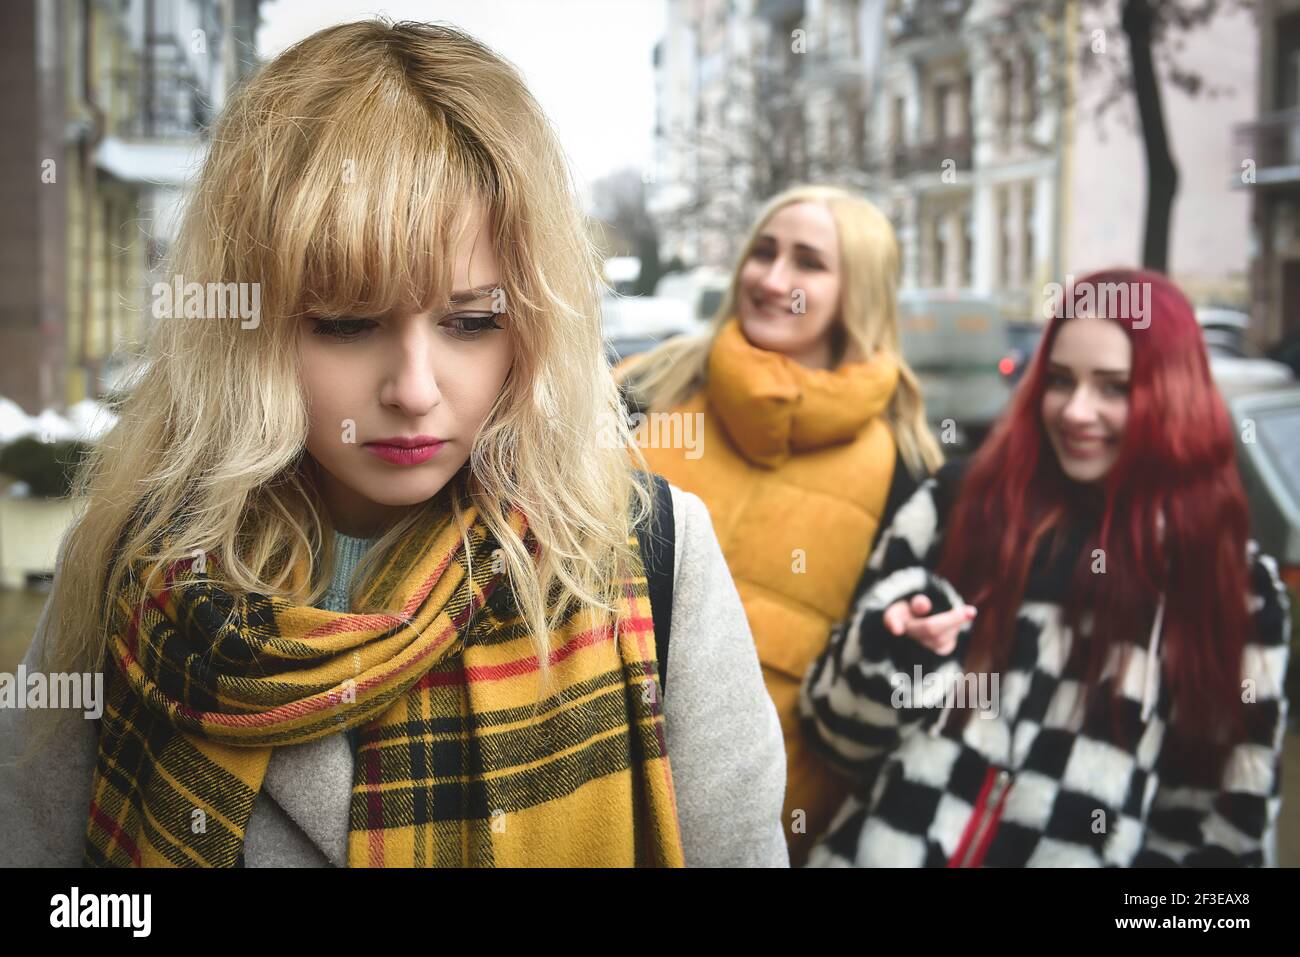 a young depressed student girl with blonde hair who is bullied by her teenage peers, disturbed by feelings of despair and suffering from oppression. s Stock Photo